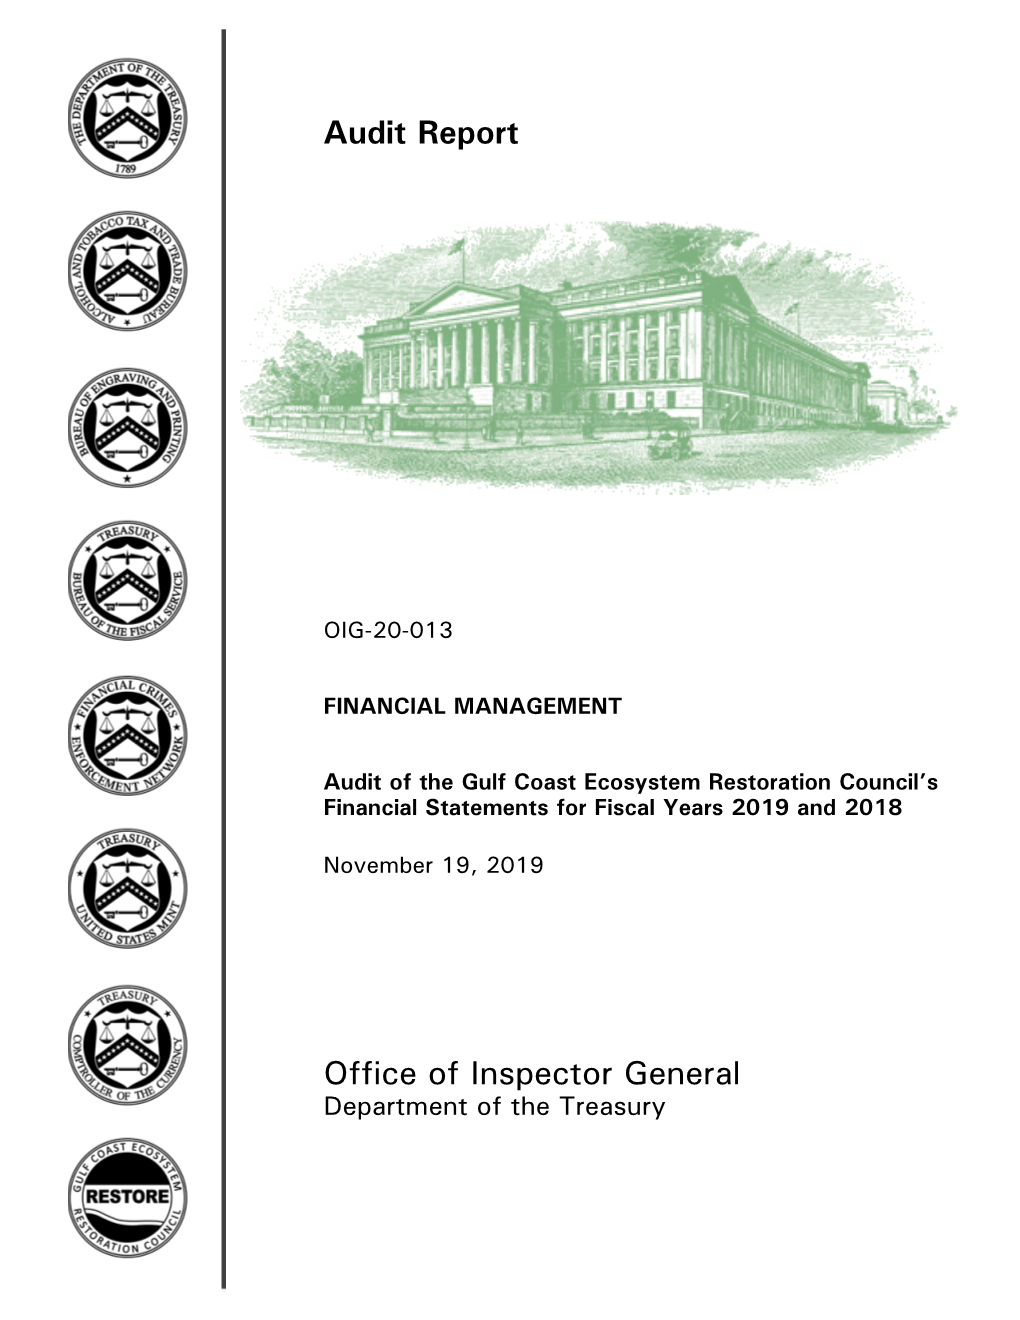 Audit of the Gulf Coast Ecosystem Restoration Council's Financial Statements/Or Fiscal Years 20/8 and 20/ 7, (OIG- 19-017; November 15, 2018)